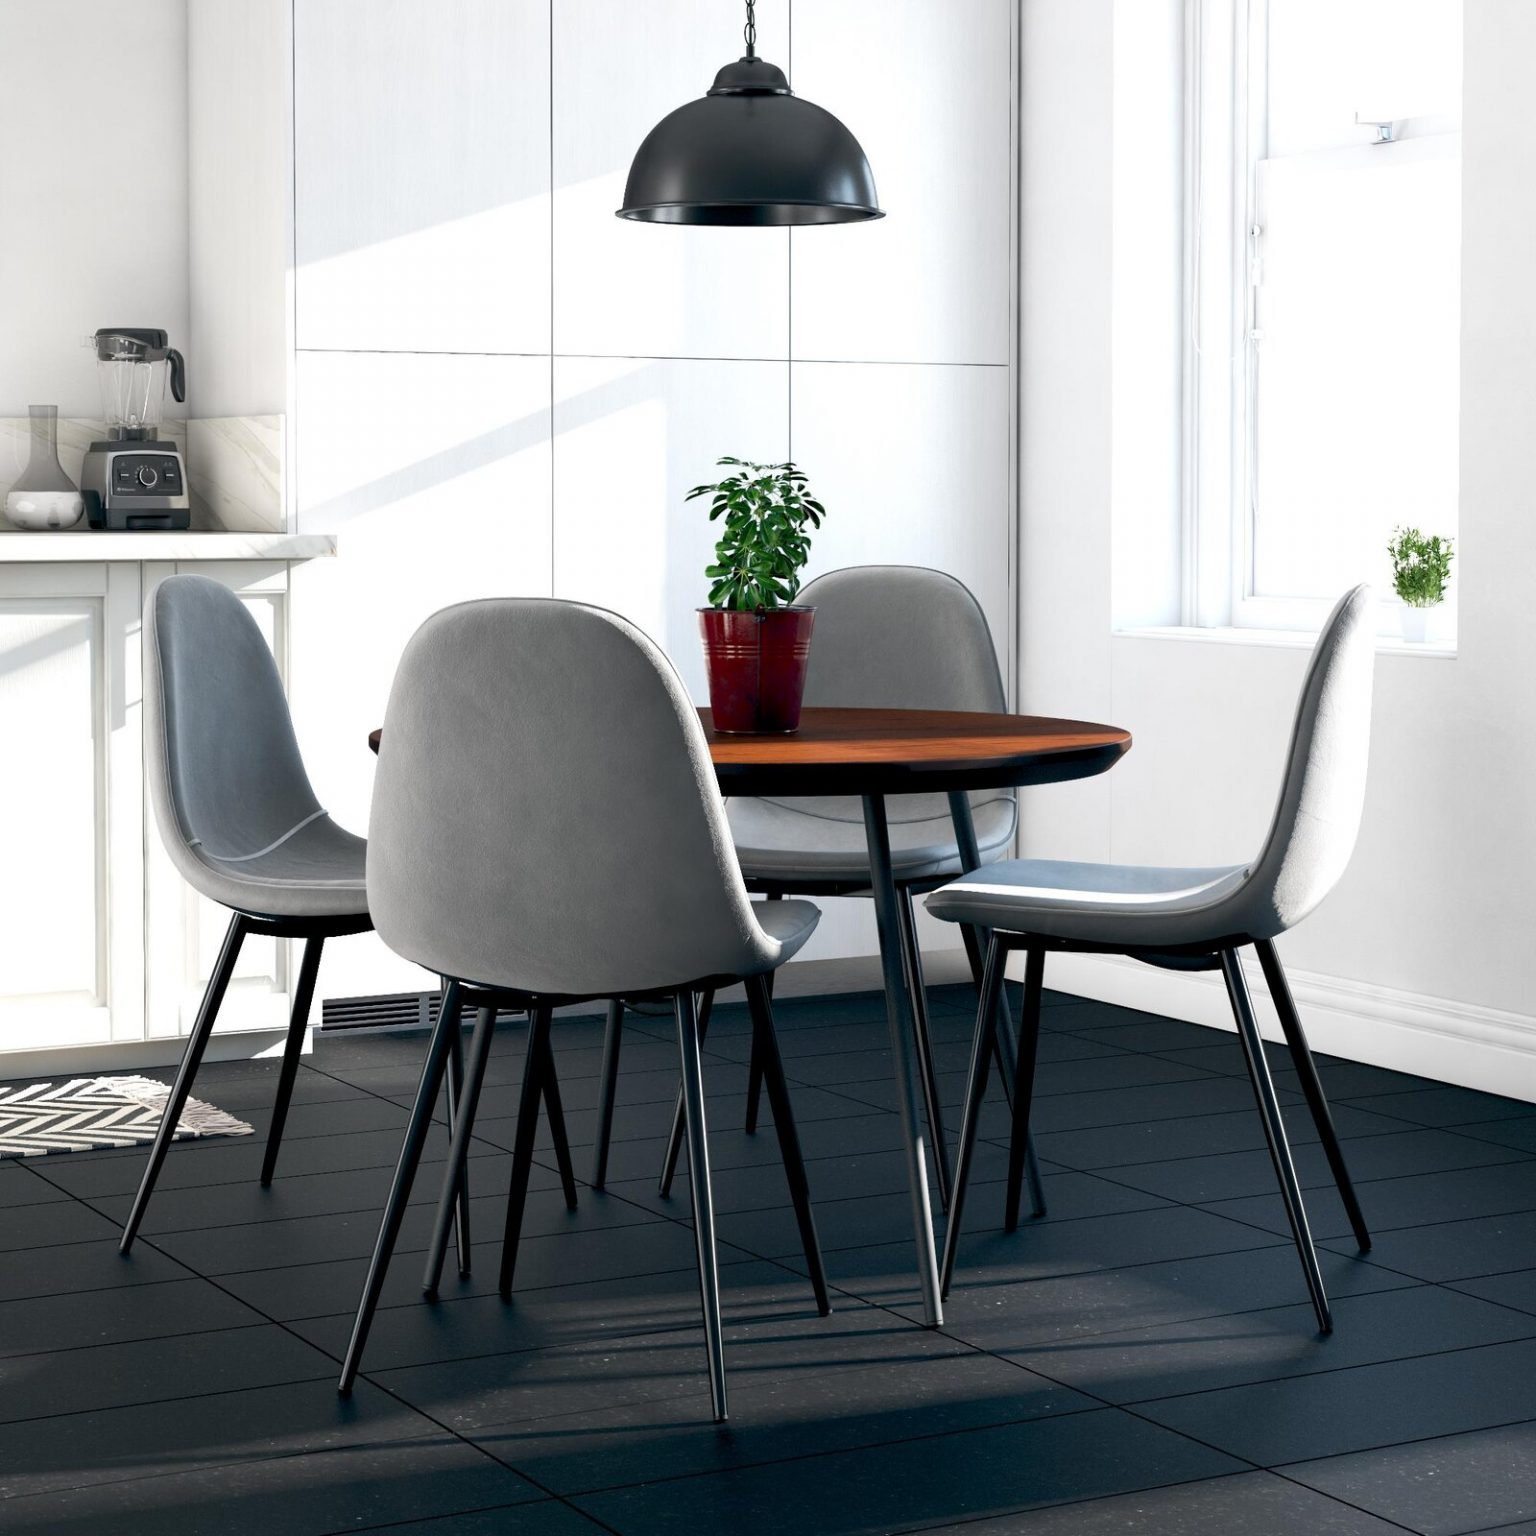 Ikea Dining Room Chairs Australia : Modern Upholstered Dining Chairs ...